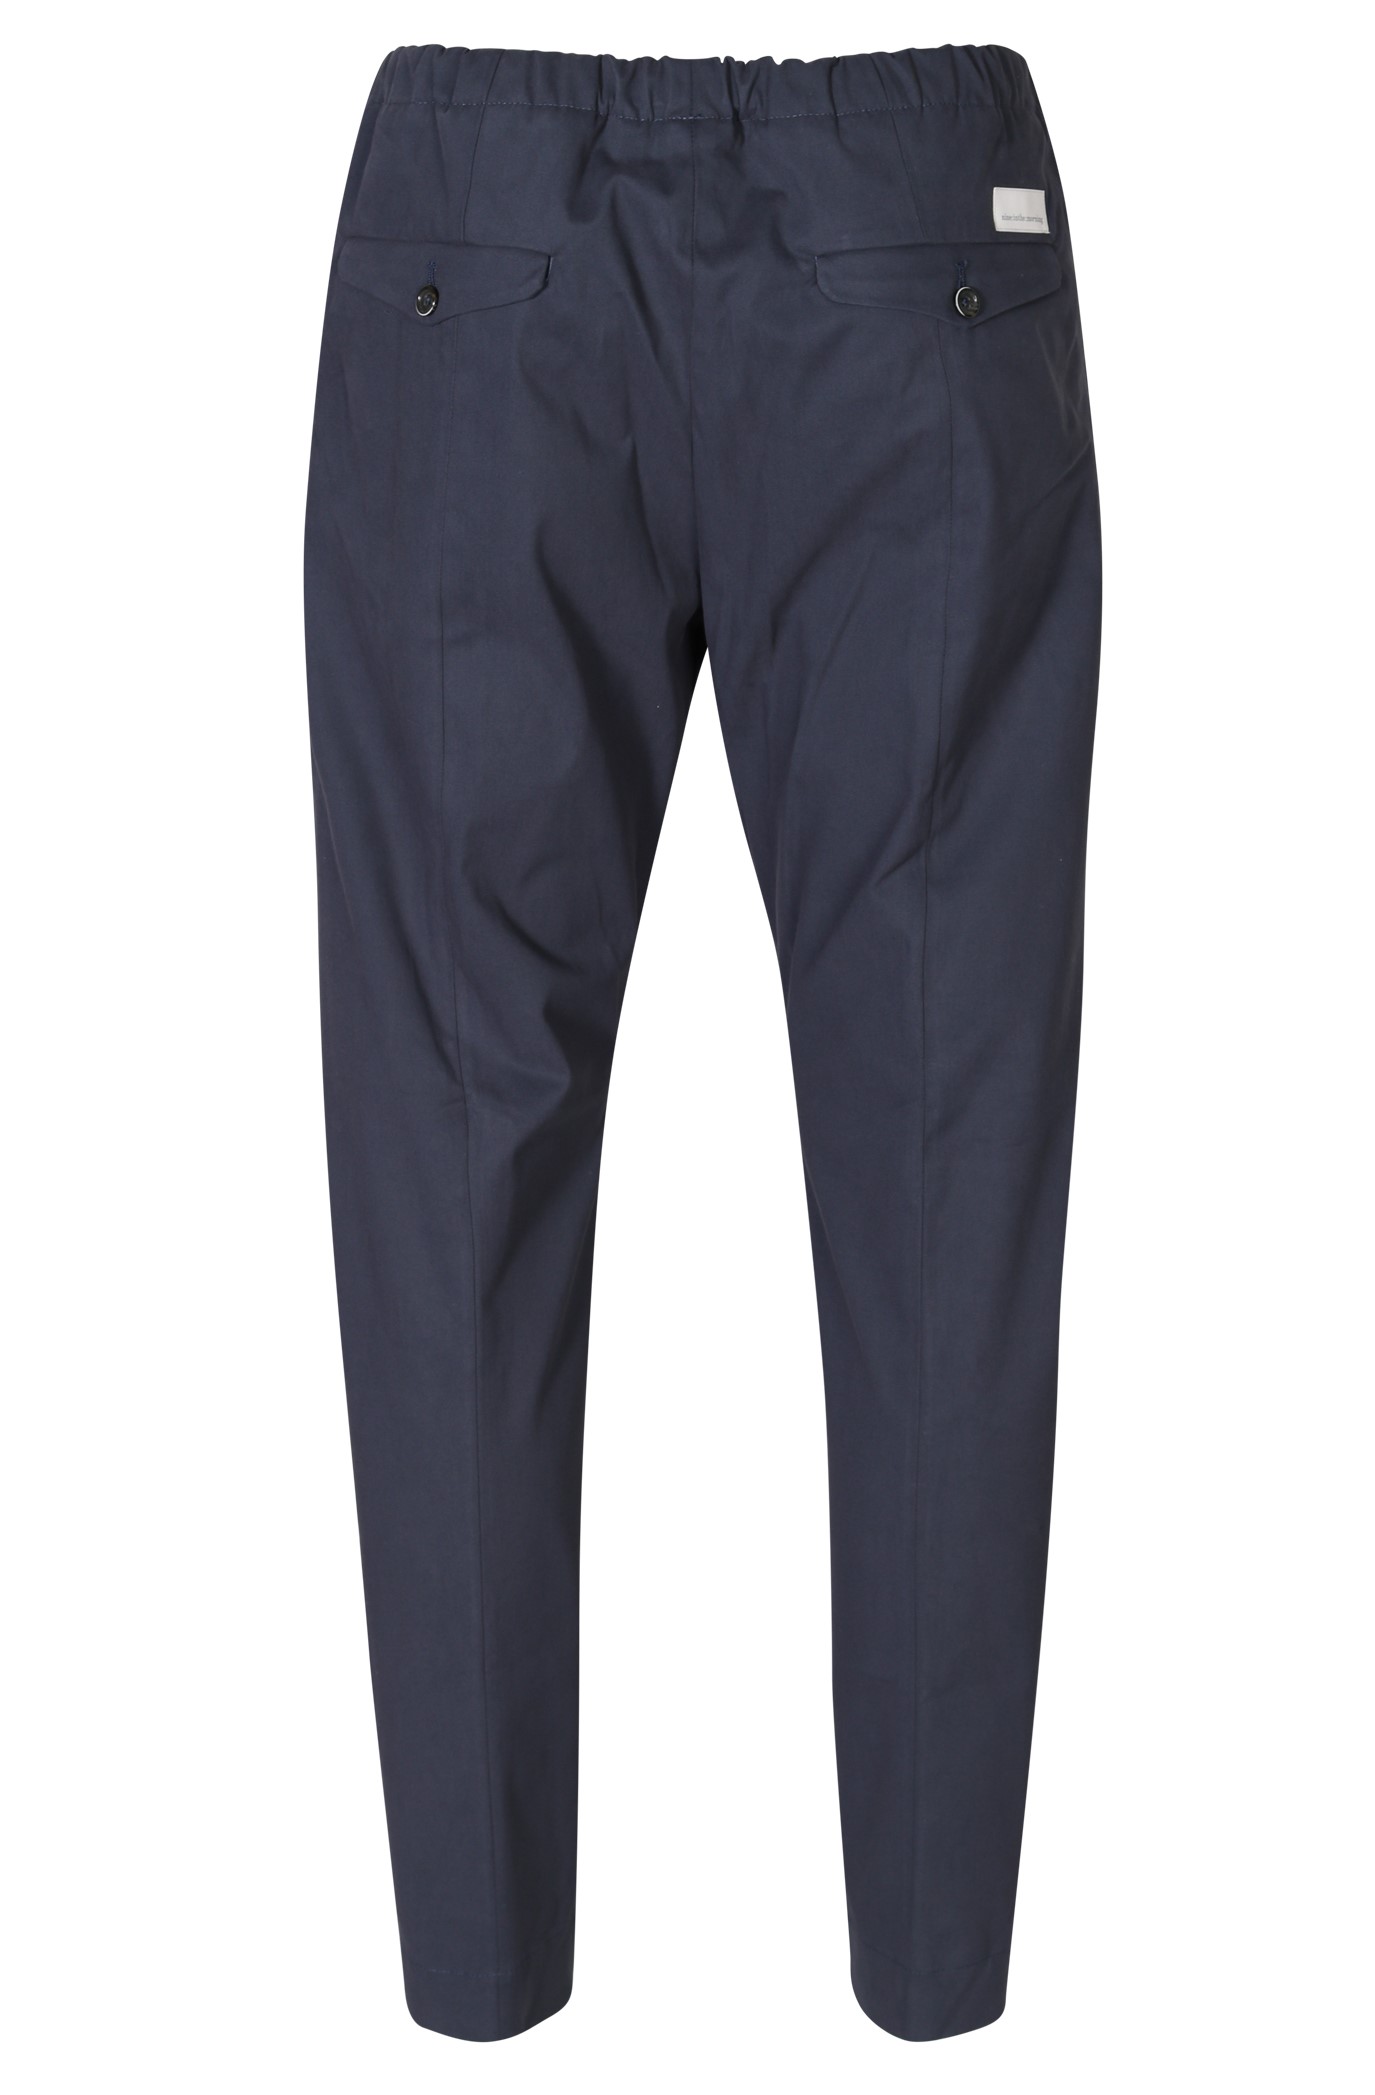 NINE:INTHE:MORNING Mirco Carrot Cotton Stretch Pant in Blue Navy 46